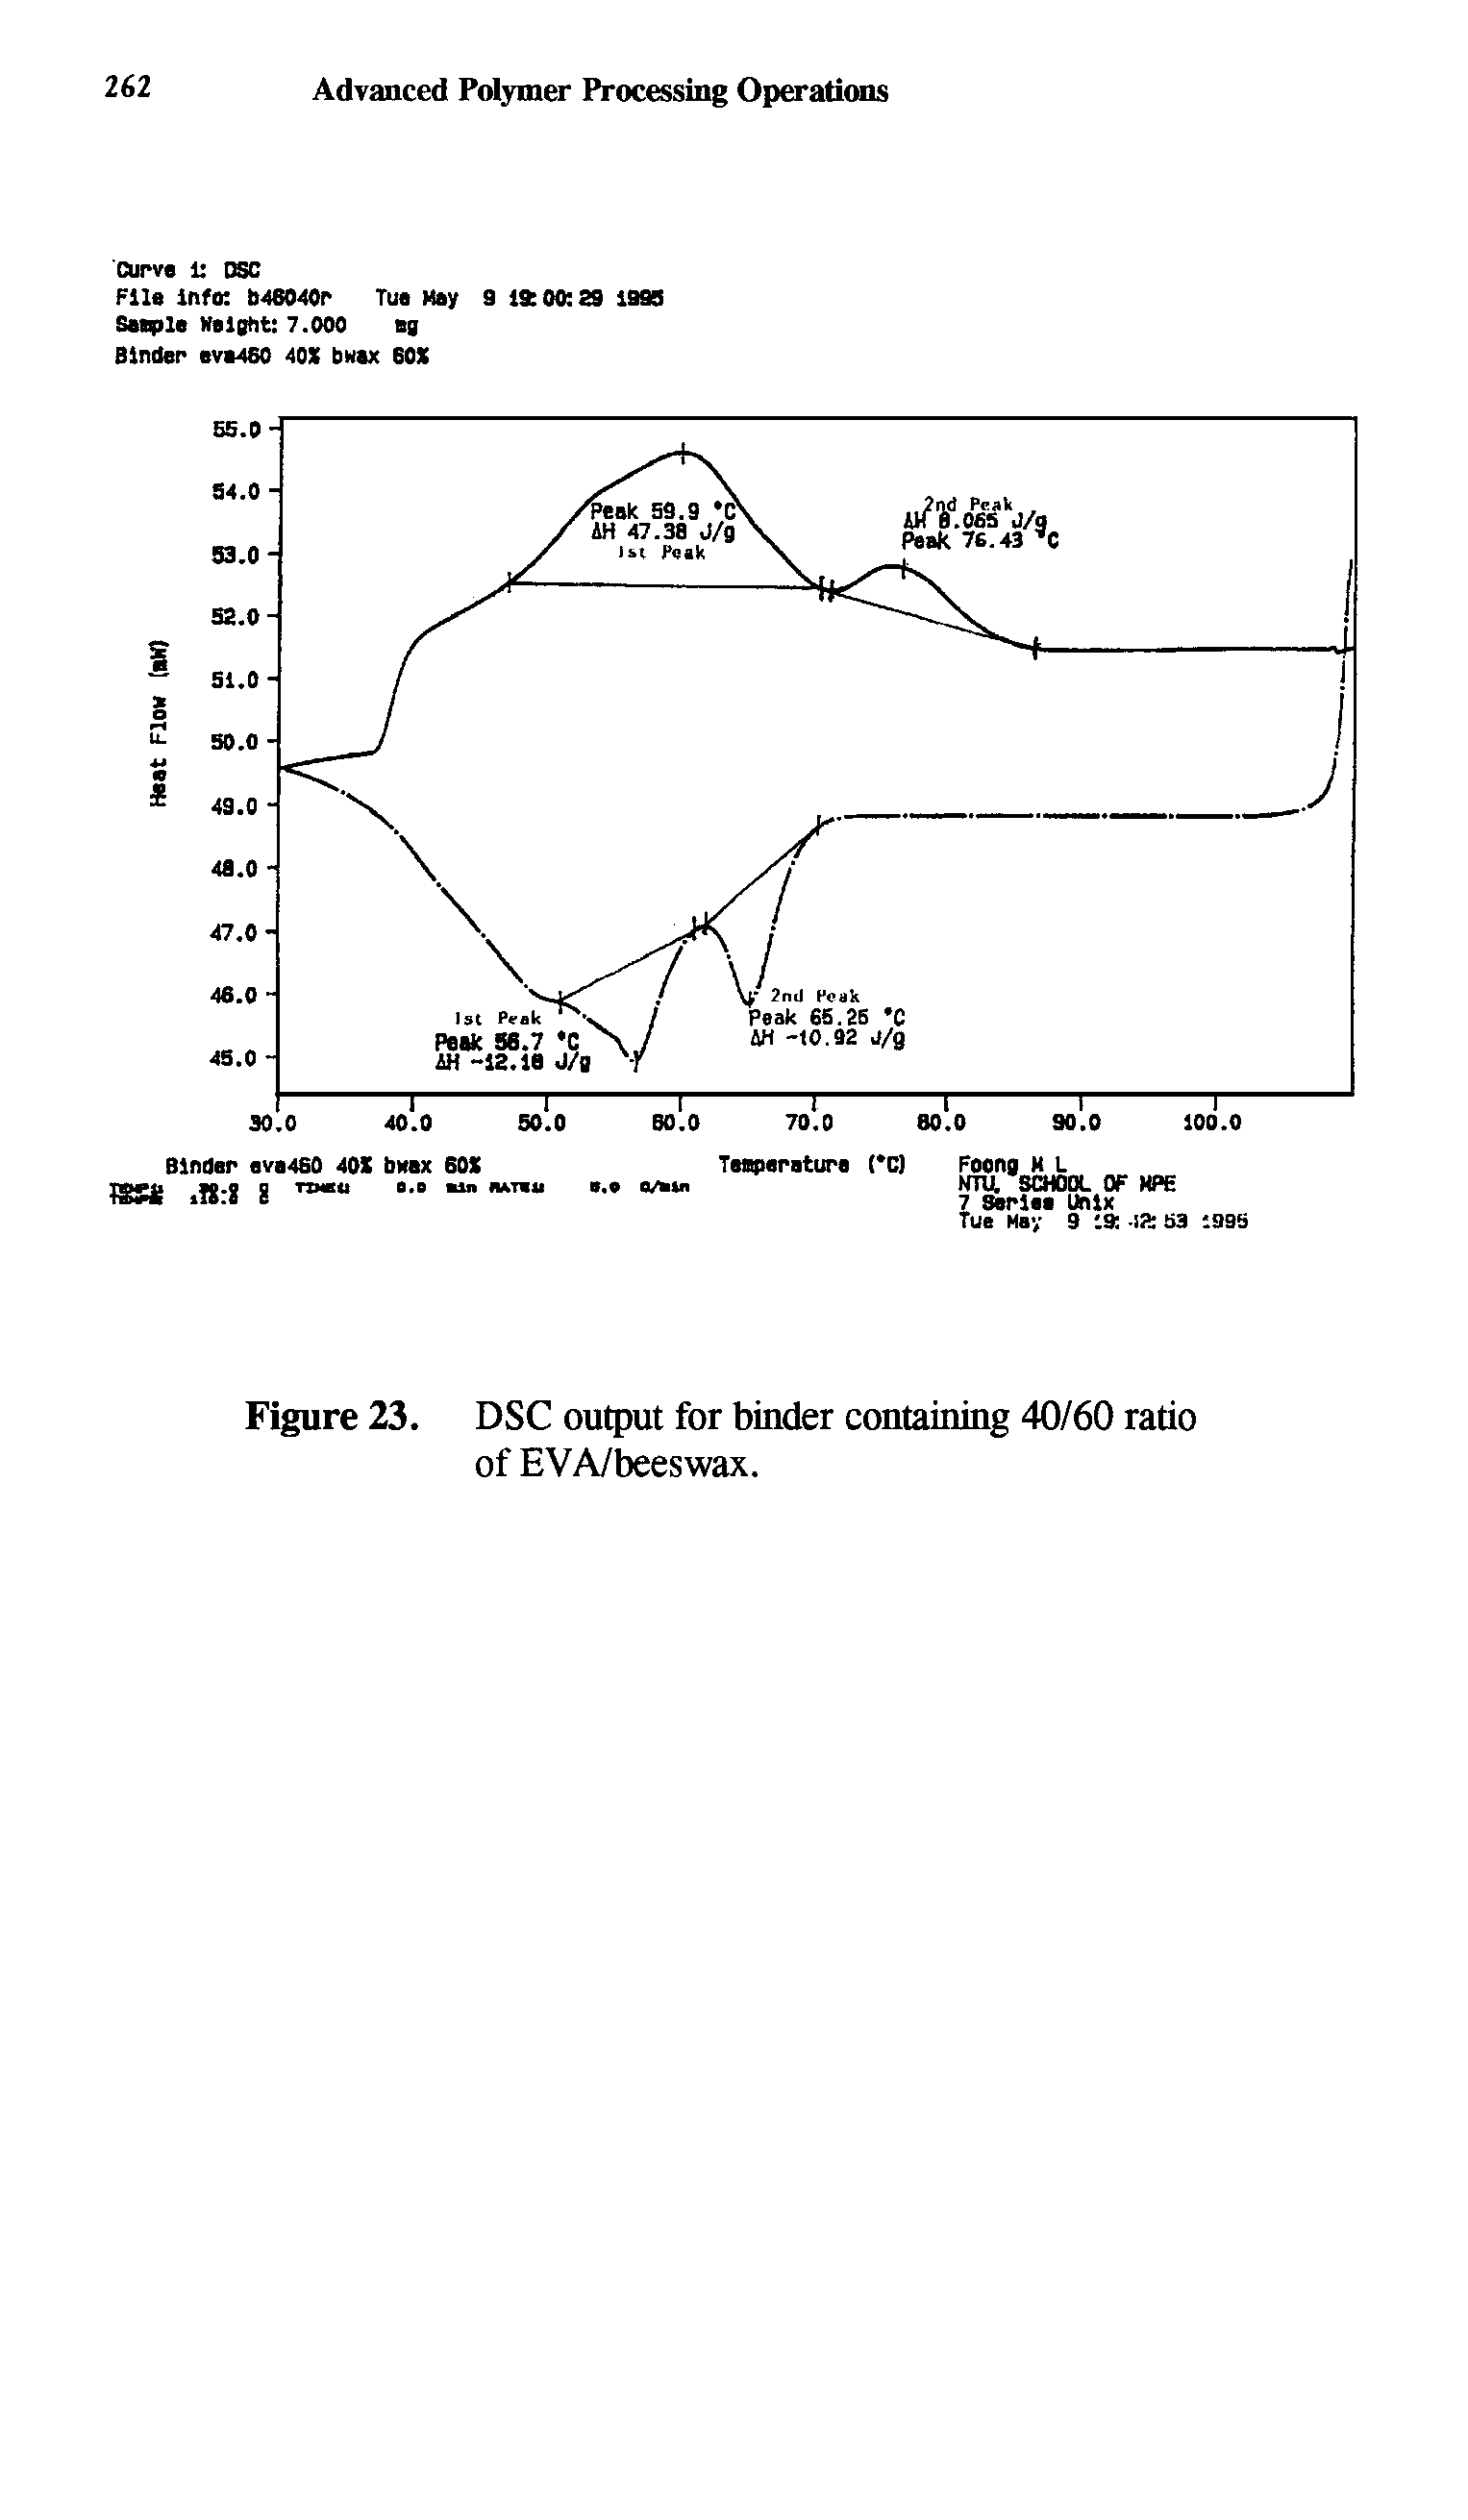 Figure 23. DSC output for binder containing 40/60 ratio of EVA/beeswax.